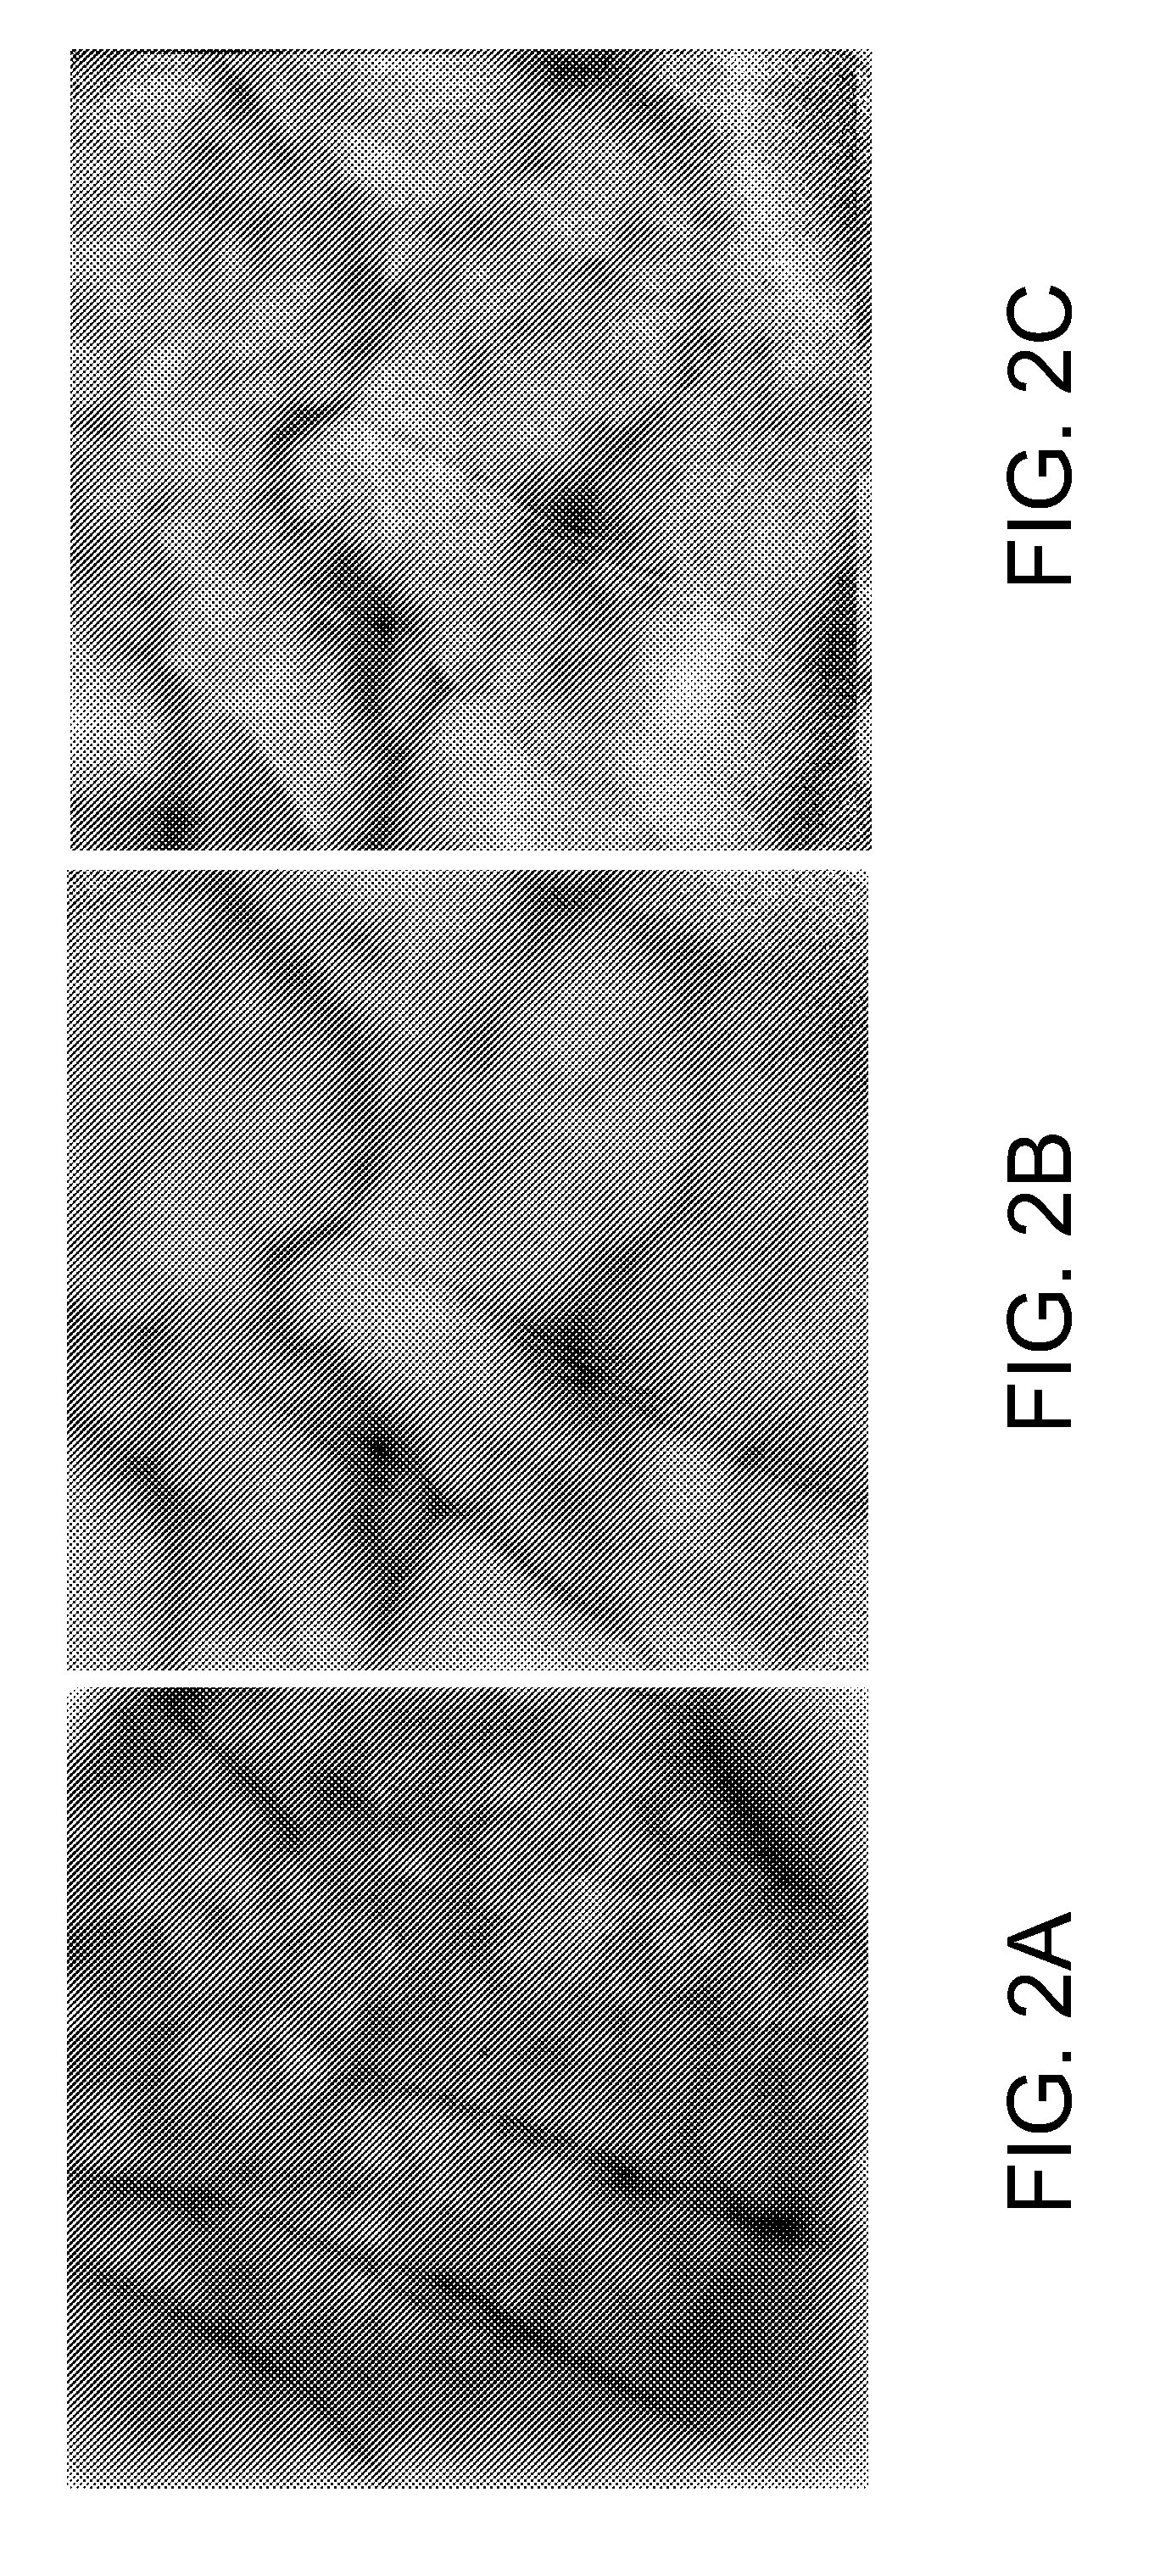 Method and apparatus for projection of subsurface structure onto an object's surface